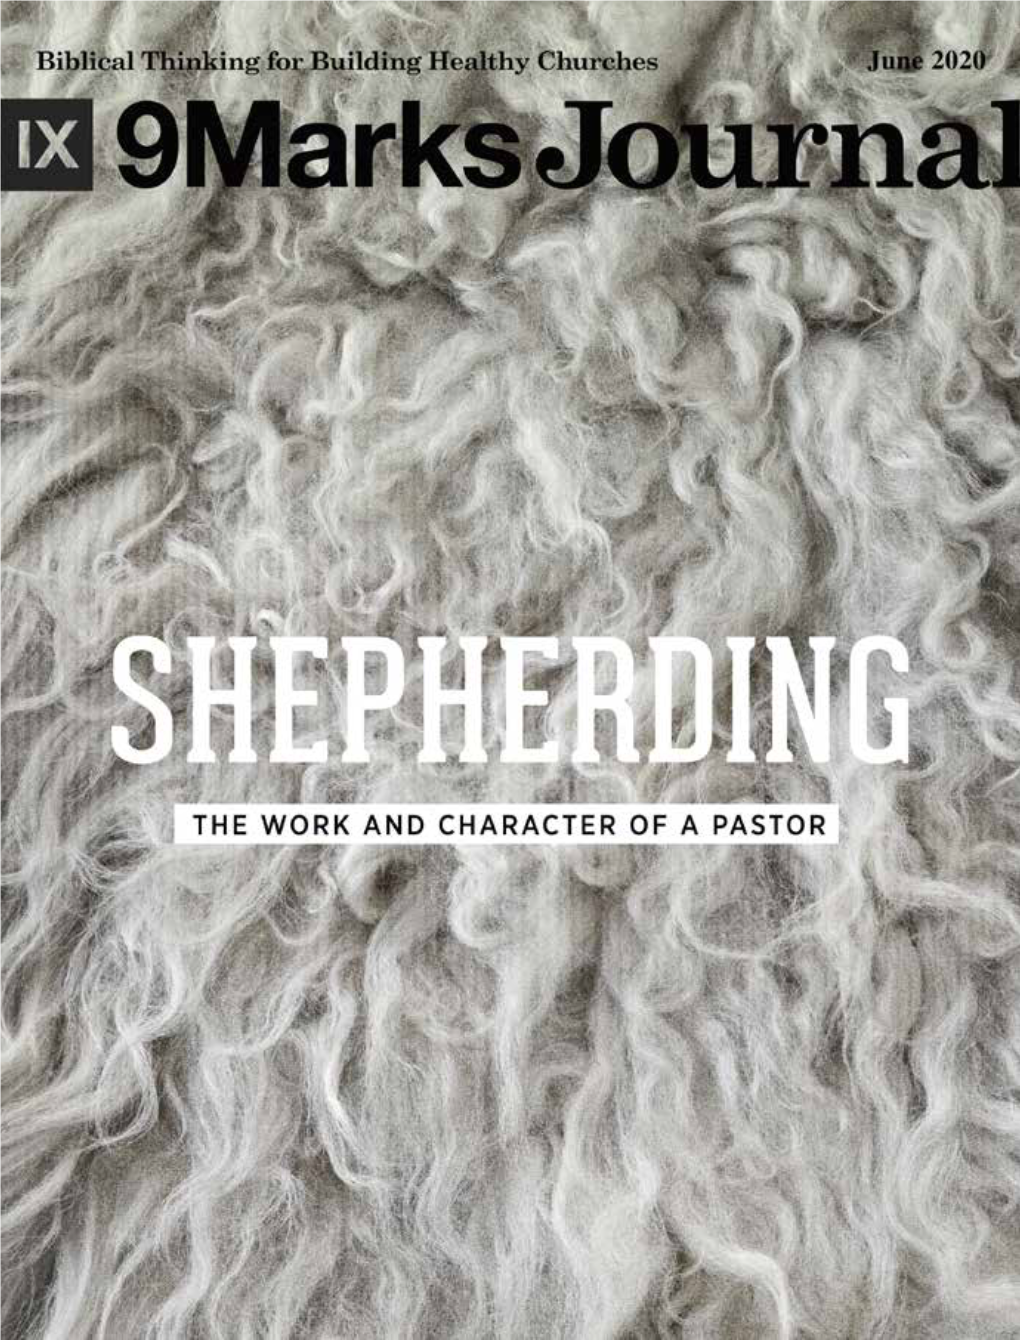 Shepherding – the Work and Character of a Pastor